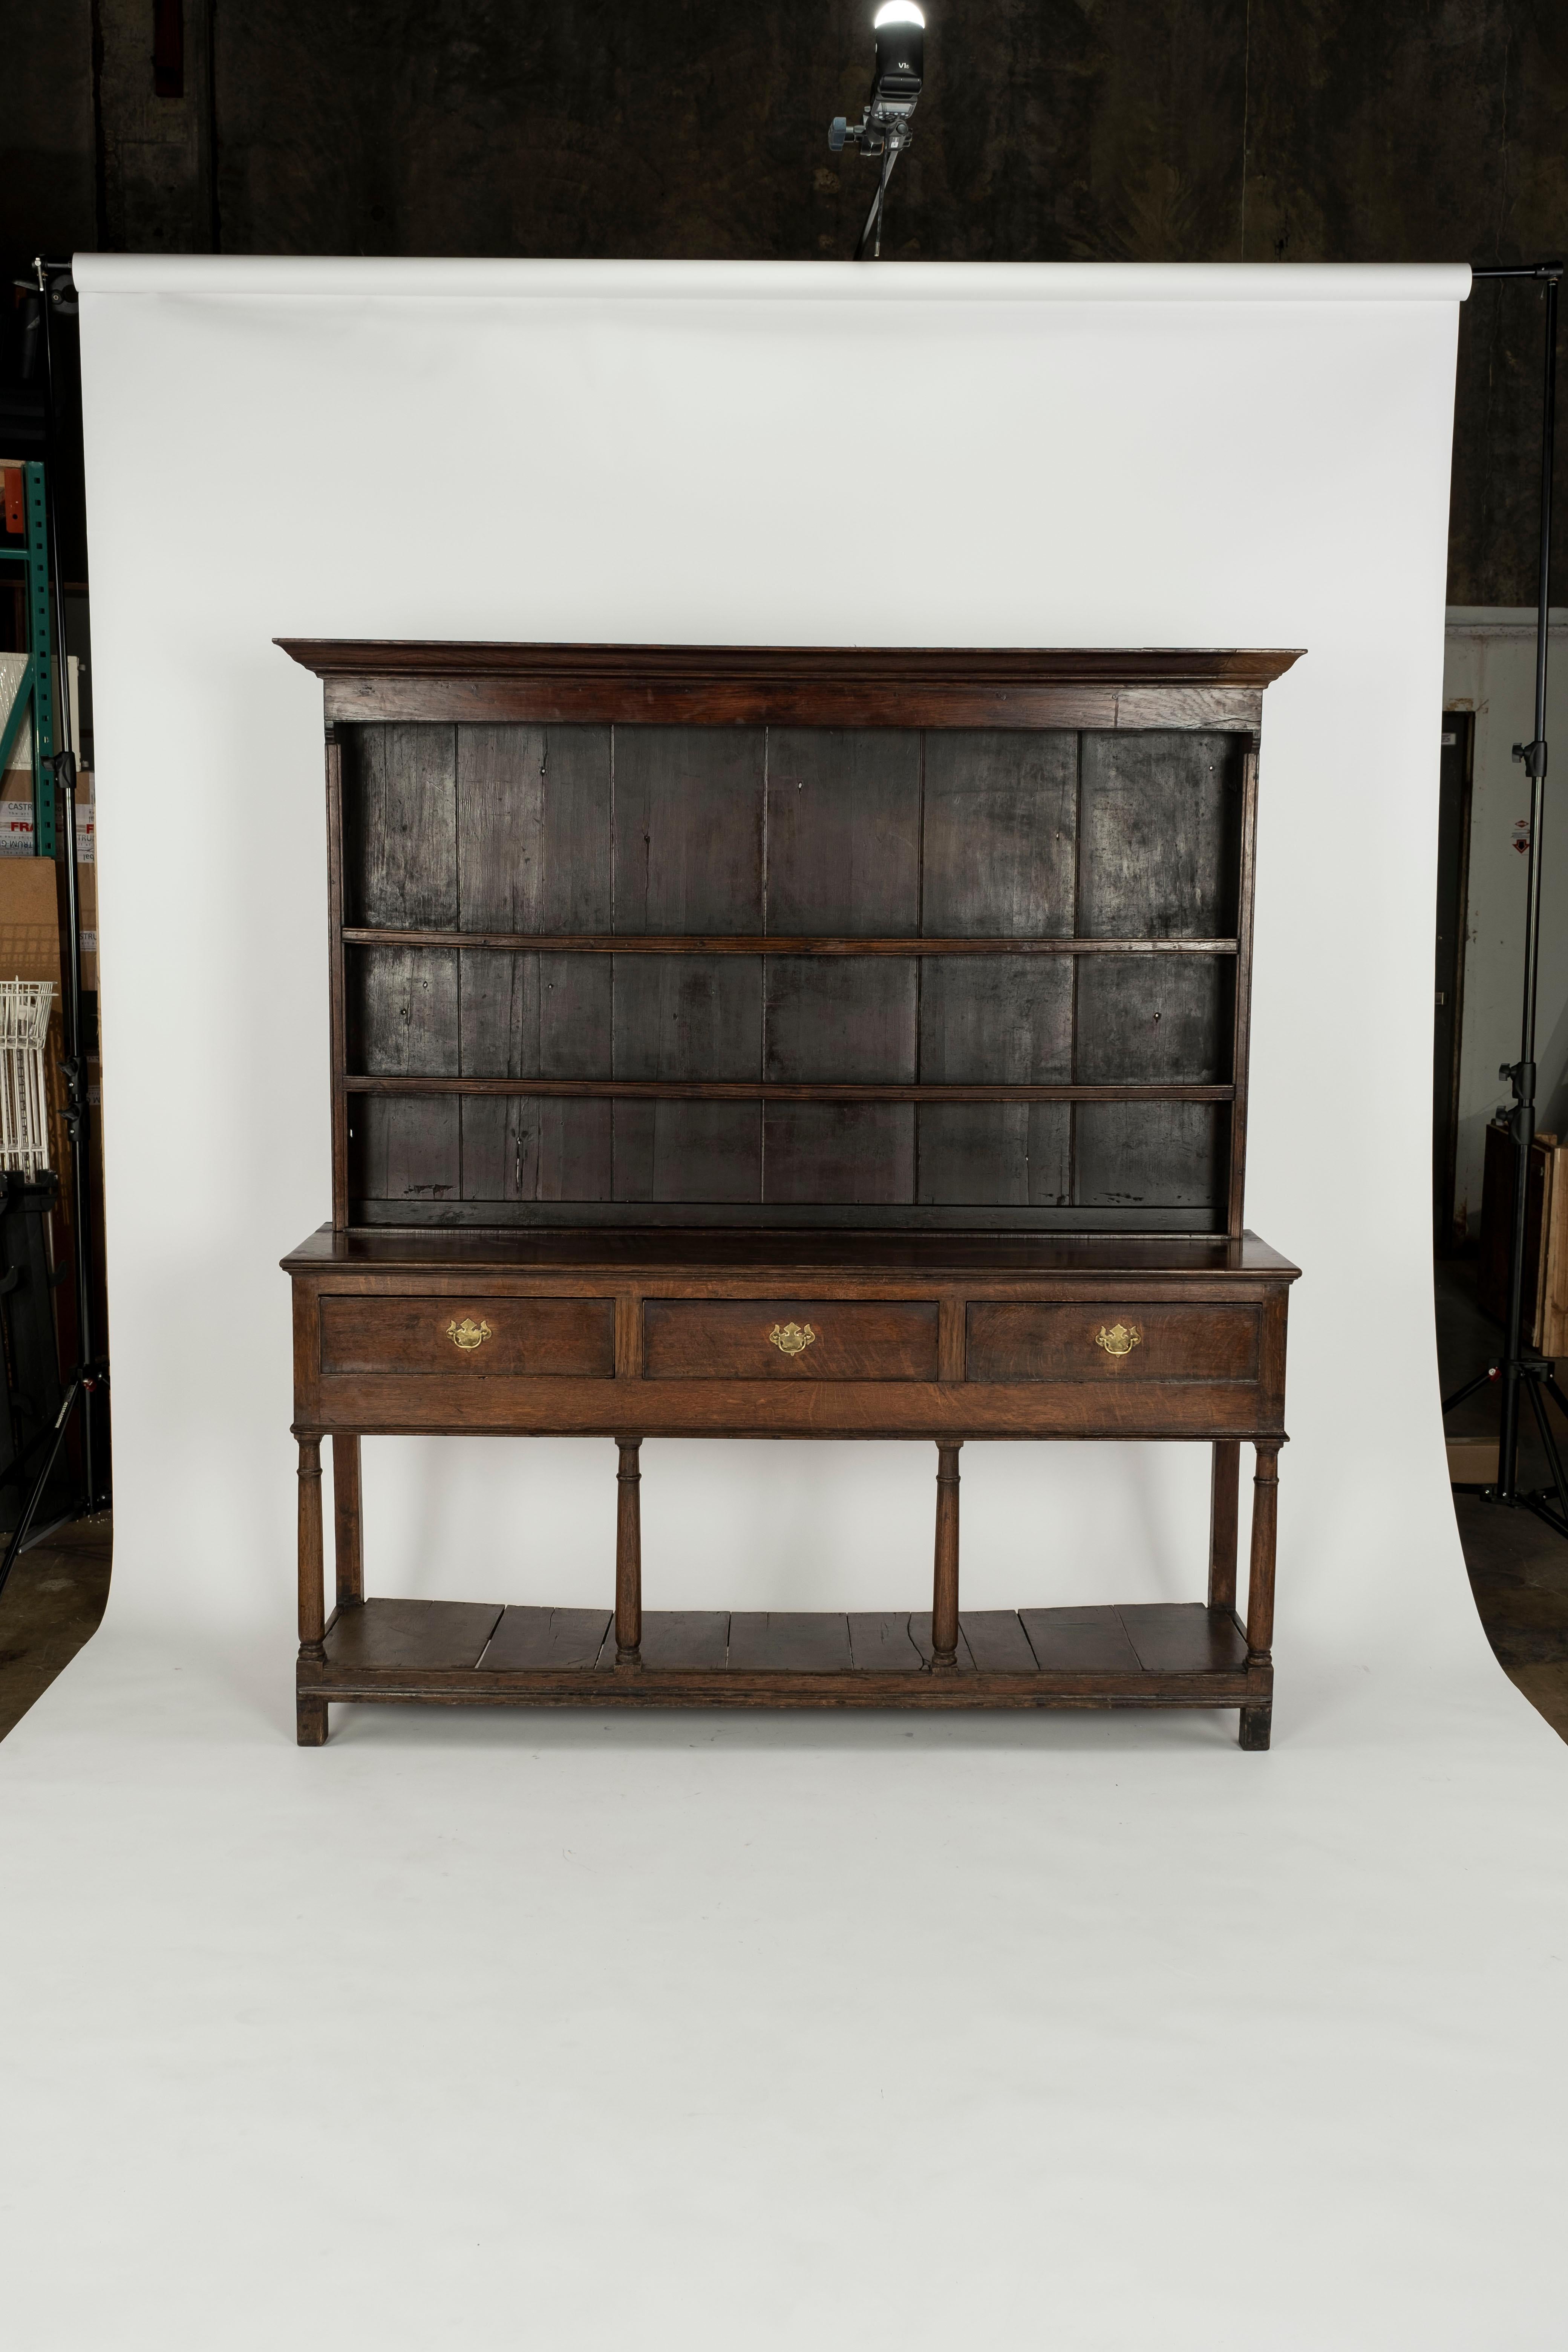 Beautiful and authentic 18th Century Welsh Dresser Base with 3 drawers and double shelf plate rack.